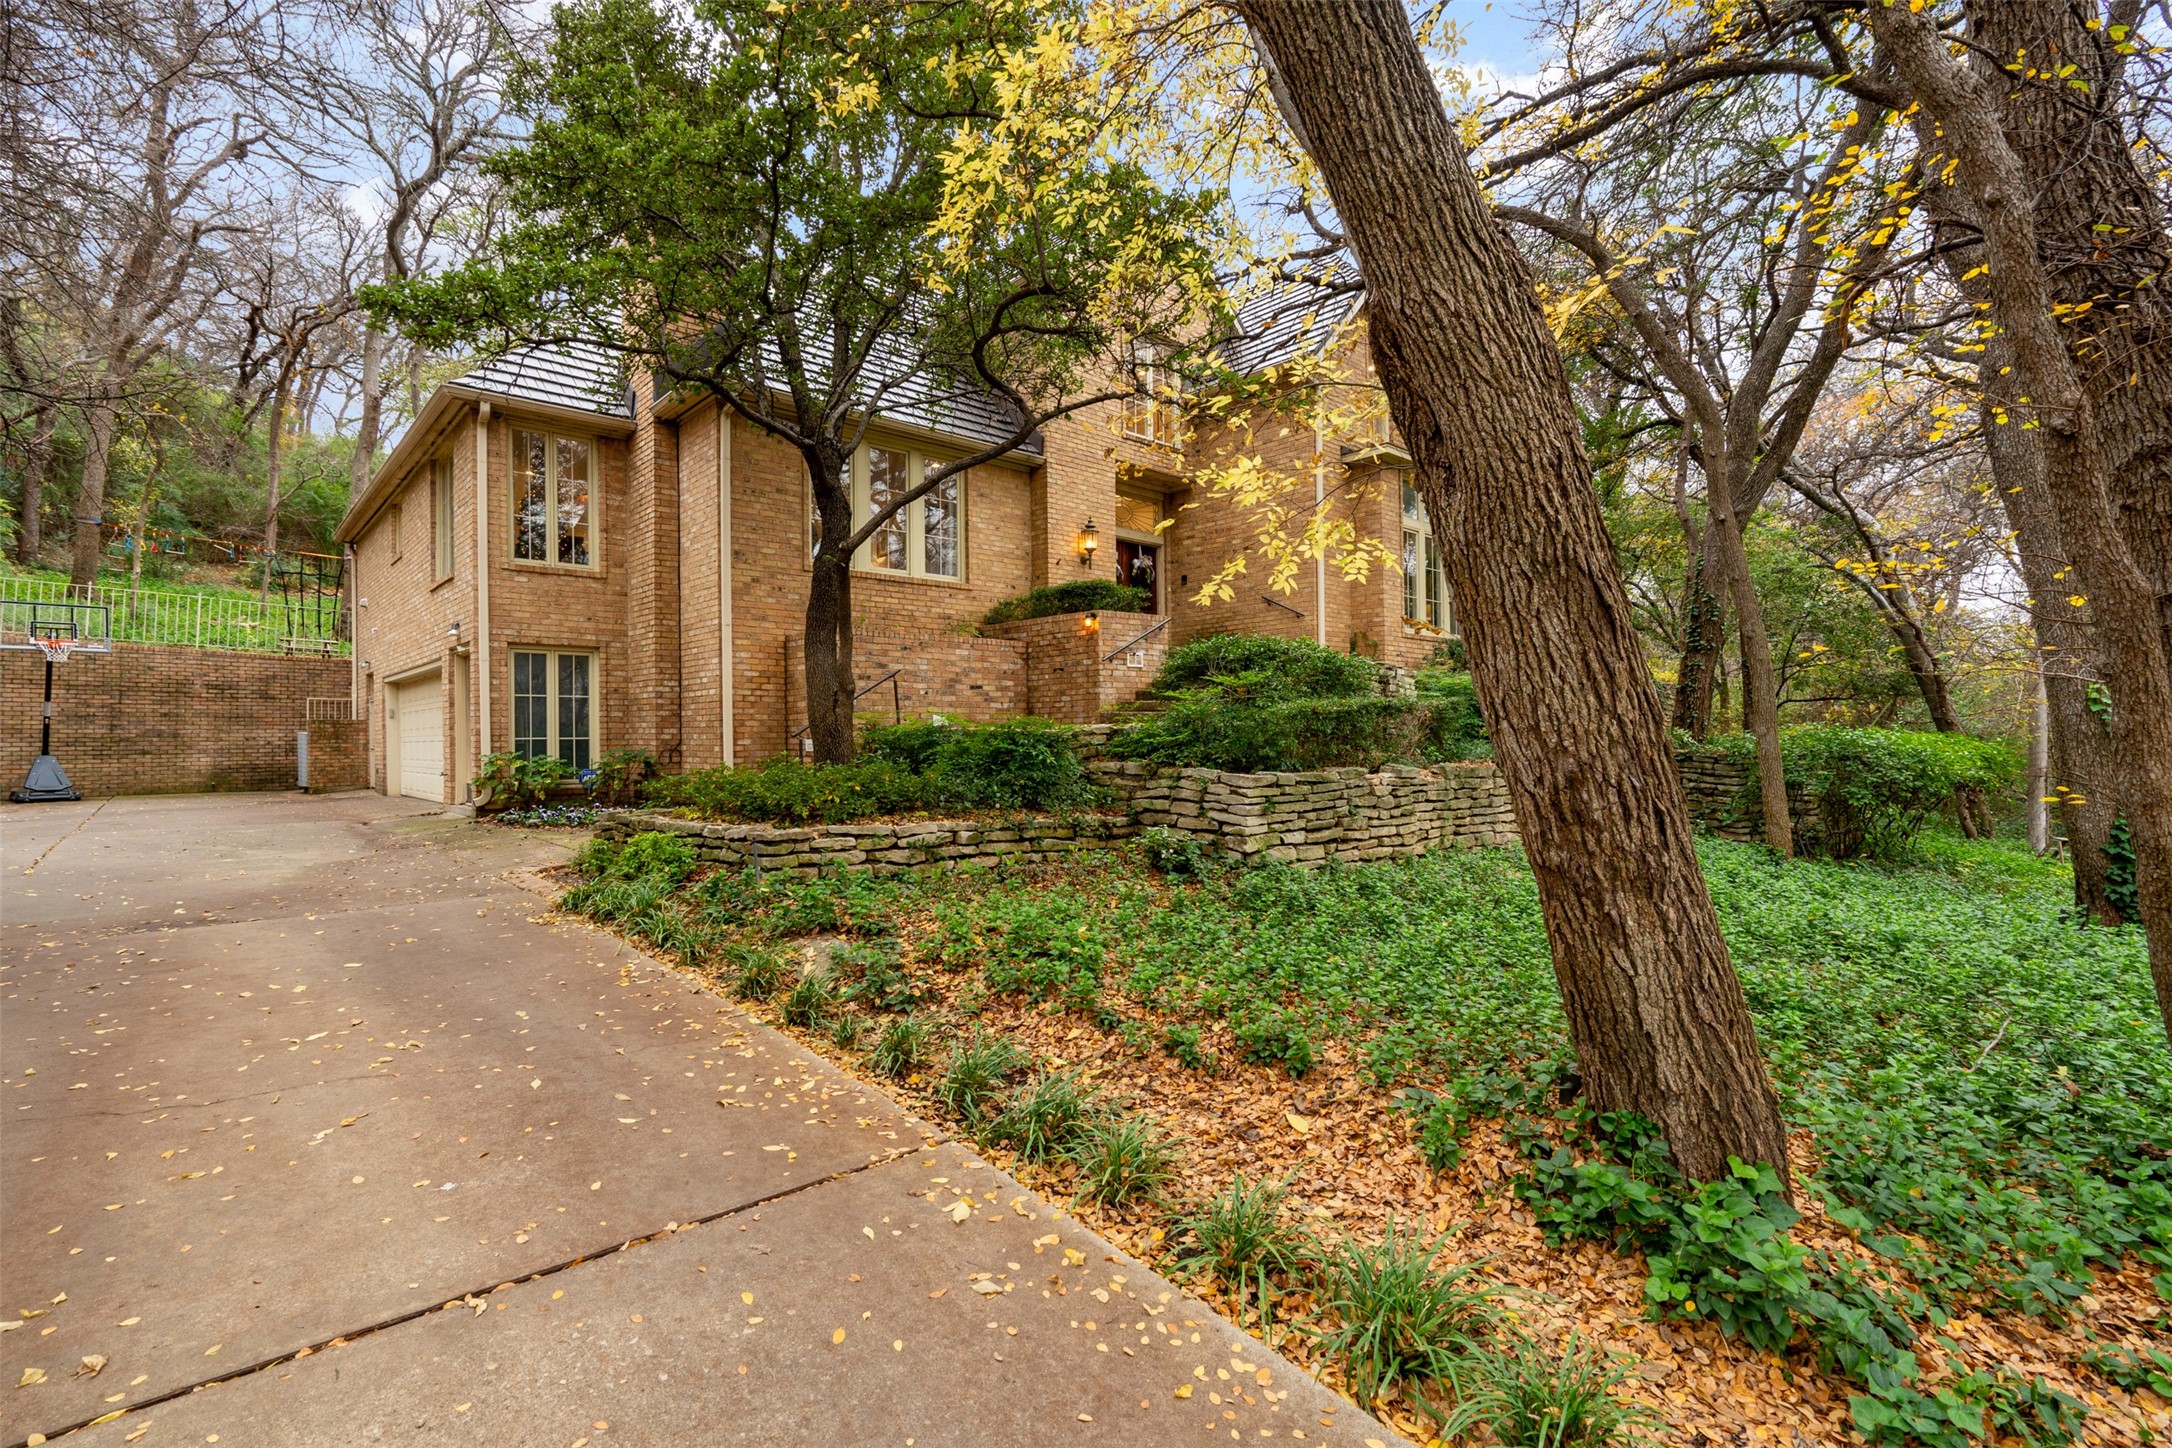 2300 ROGERS AVENUE, FORT WORTH, TX 76109 